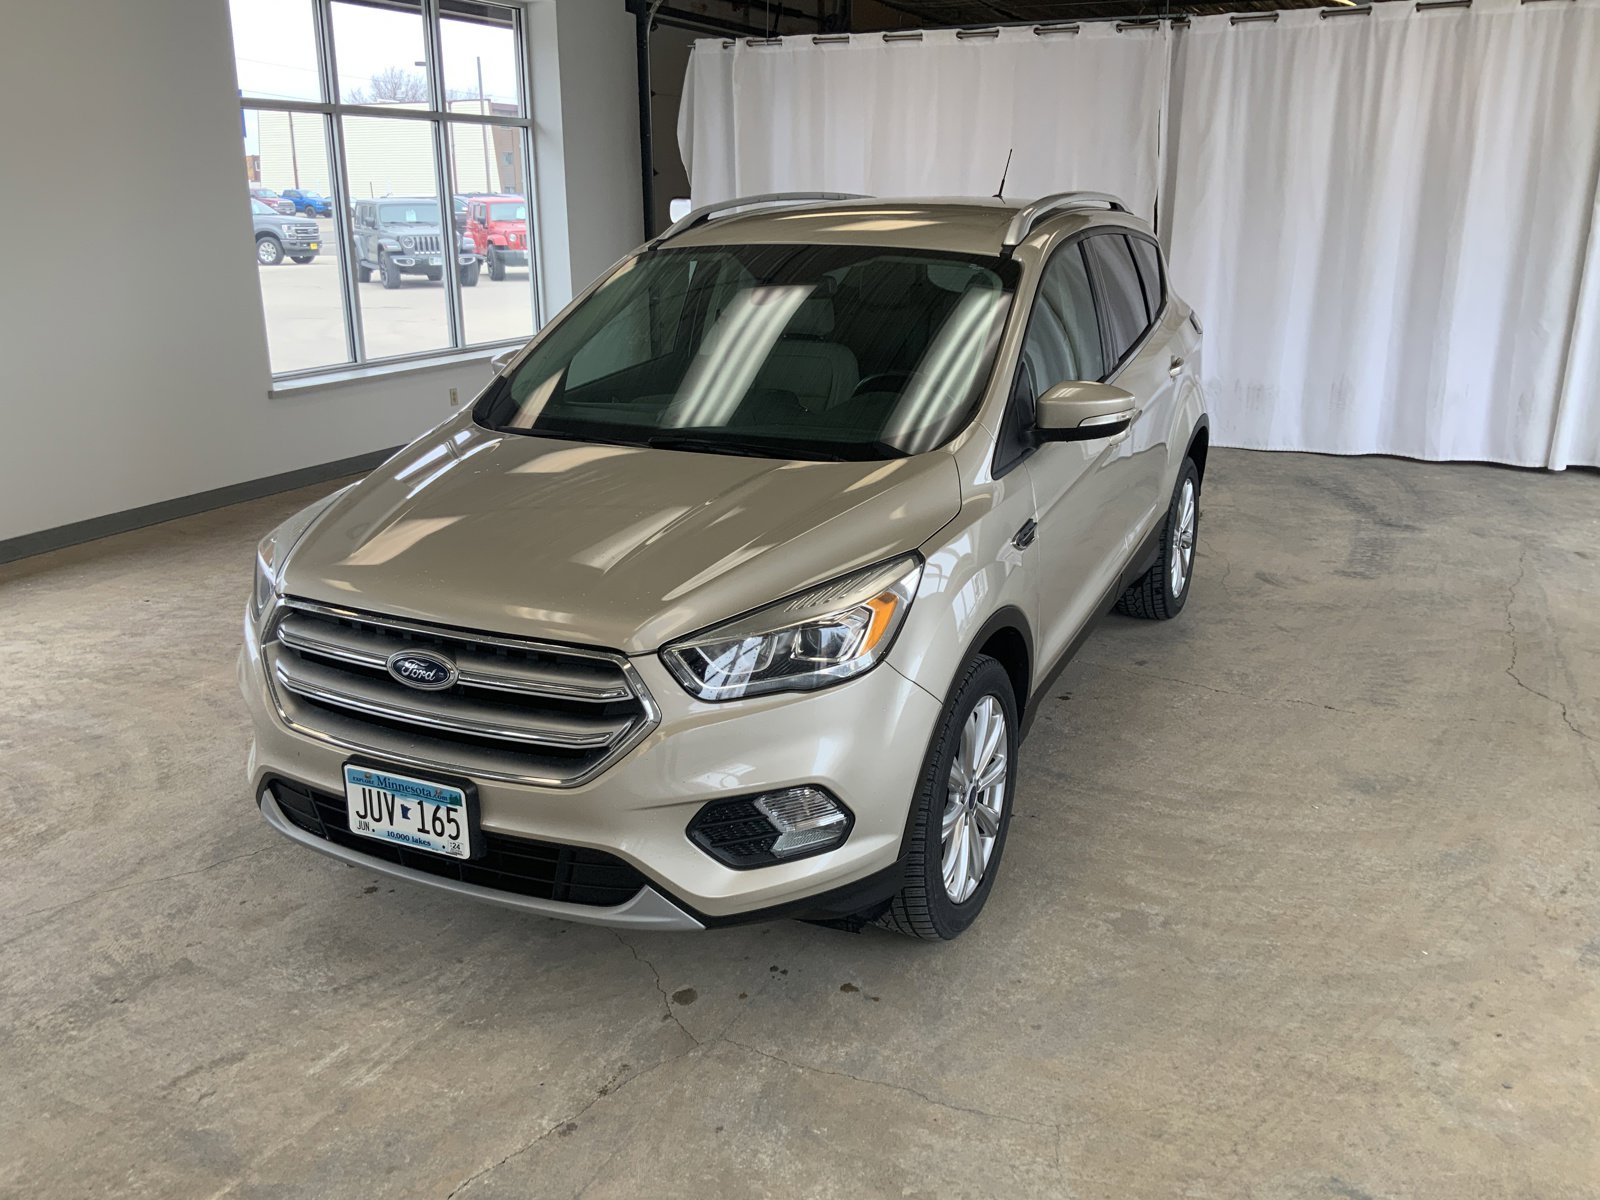 Used 2017 Ford Escape Titanium with VIN 1FMCU9J92HUA04196 for sale in Alexandria, Minnesota